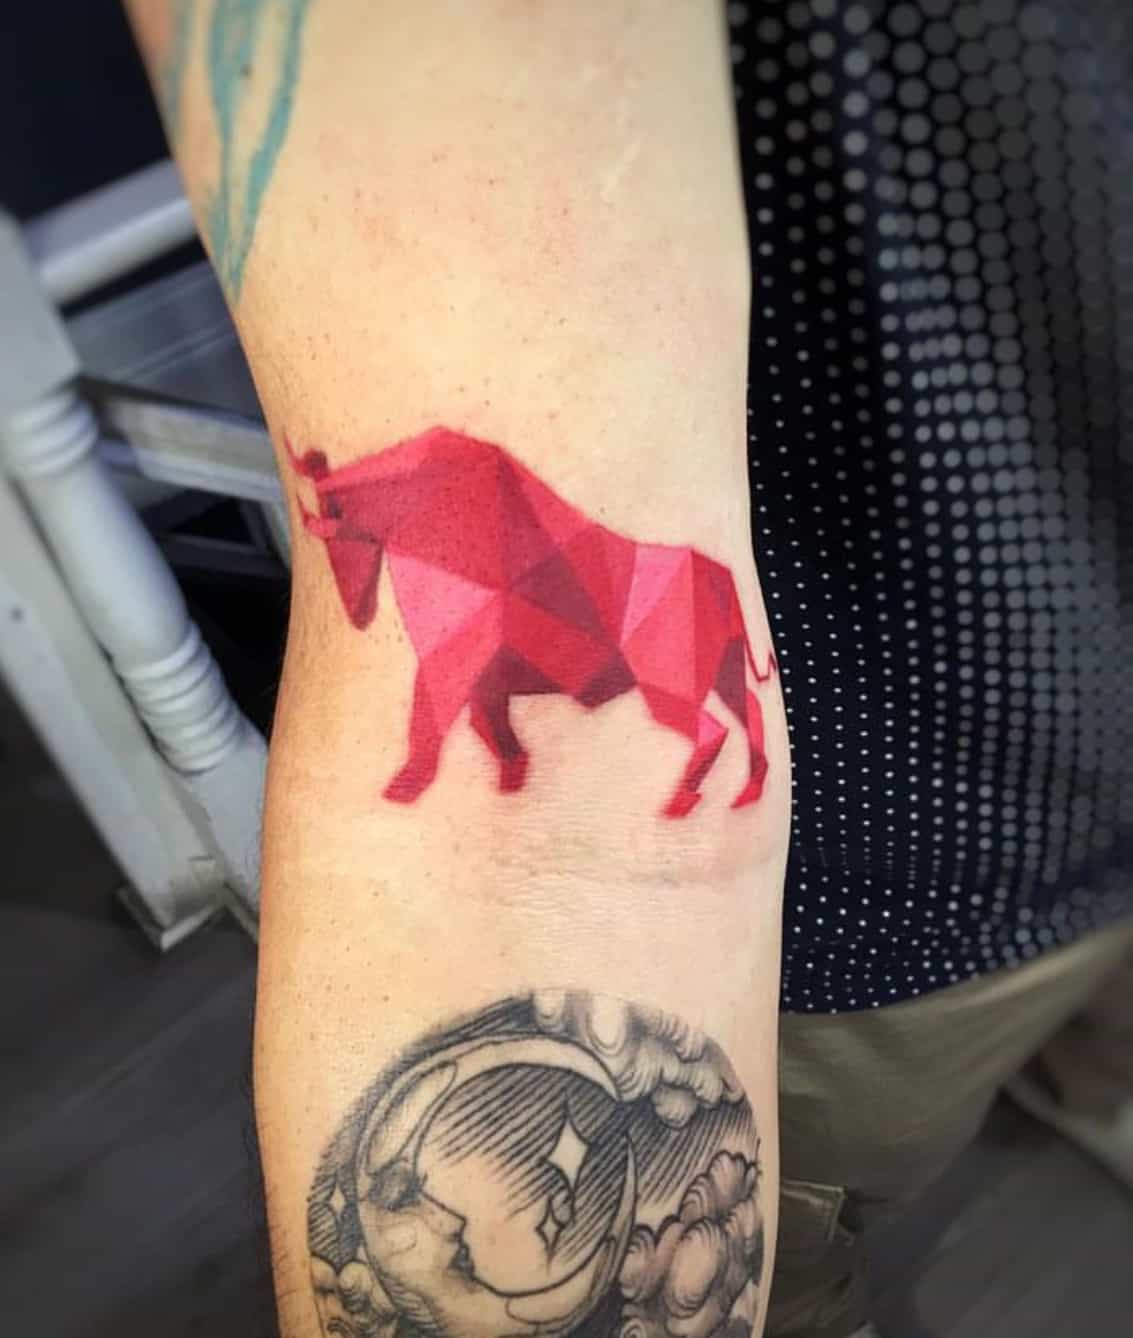 Taurus. Done by Kirsty Wells at Molotov and Bricks, Whitehorse, YT : r/ tattoos